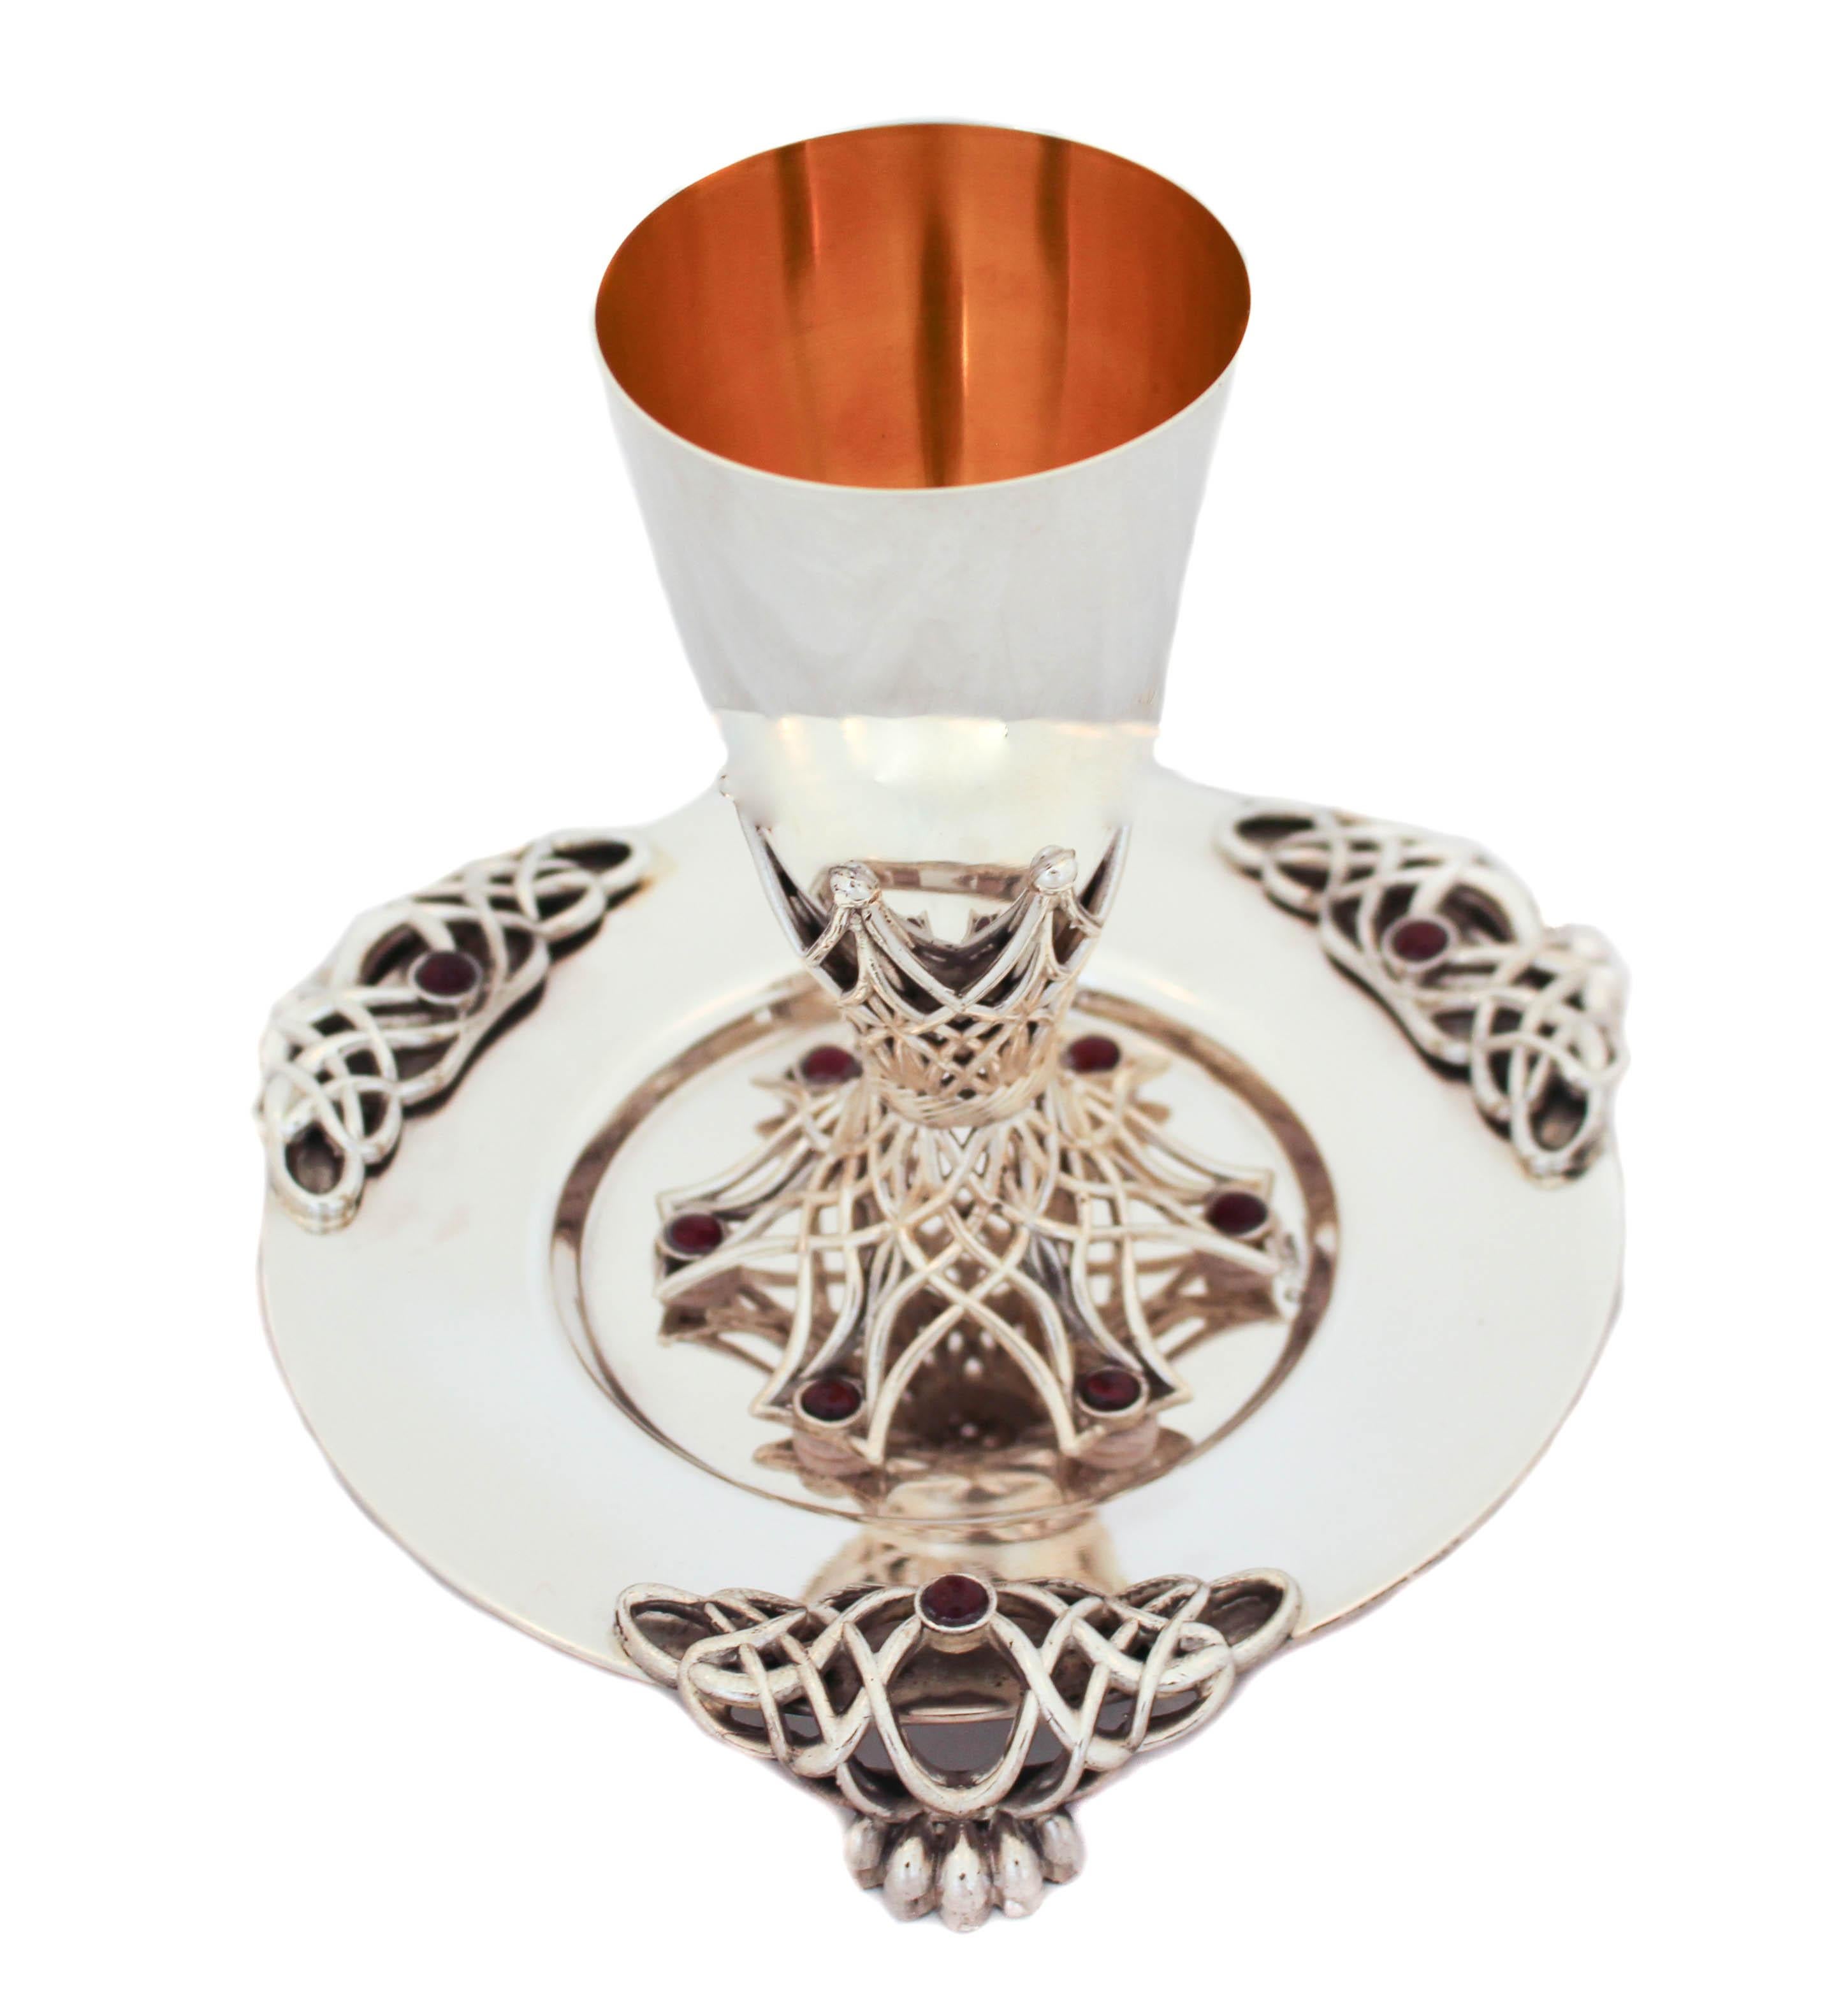 This gorgeous sterling silver Kiddush cup and plate are made in Israel. The cup has six garnet stones around the base; one stone per leg. The plate has the same design as the cup with a and larger stone in each of the feet. It’s an interesting mix